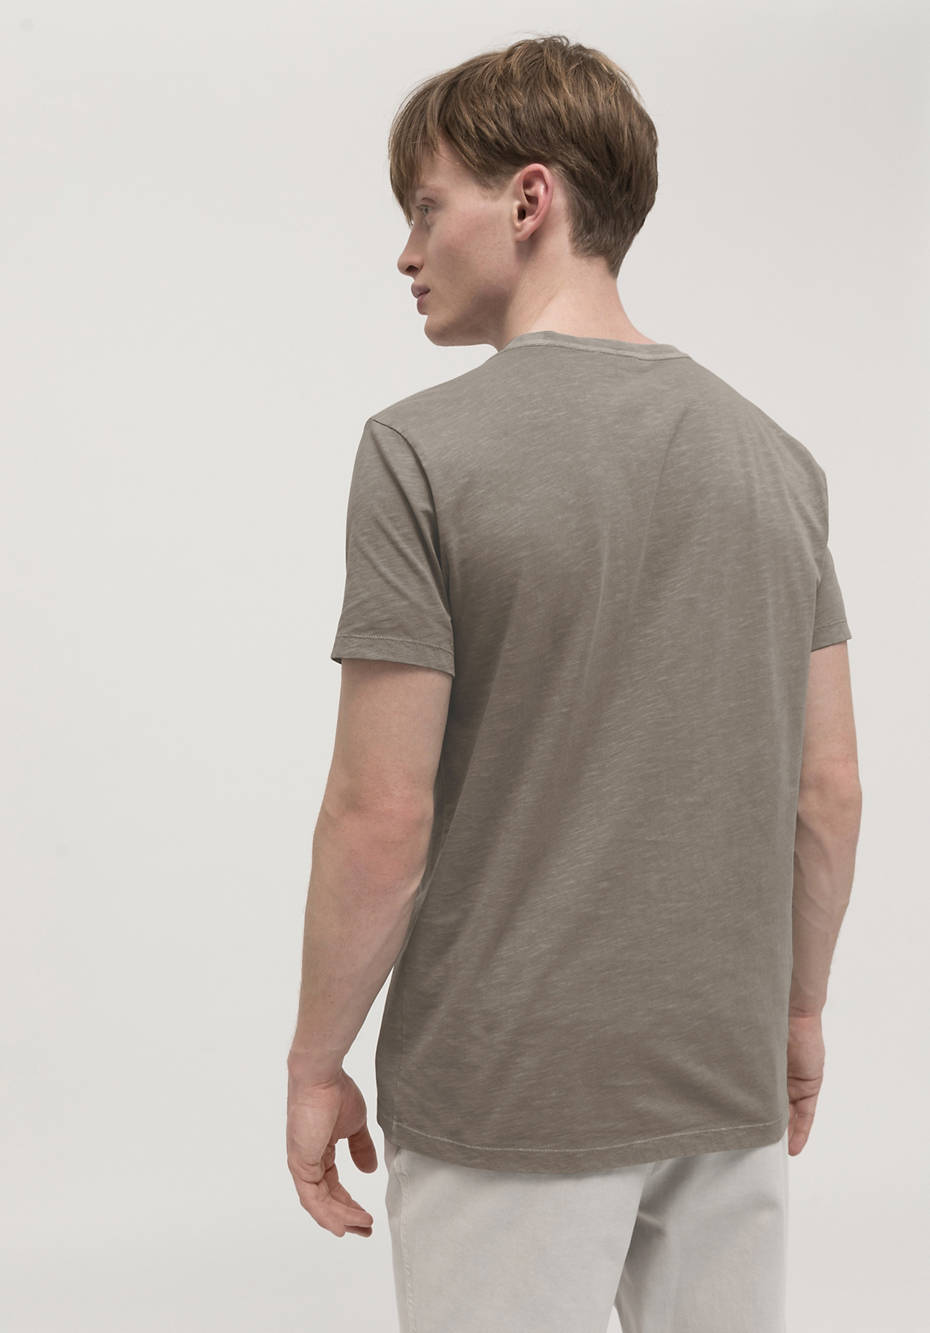 Mineral-dyed t-shirt made from pure organic cotton